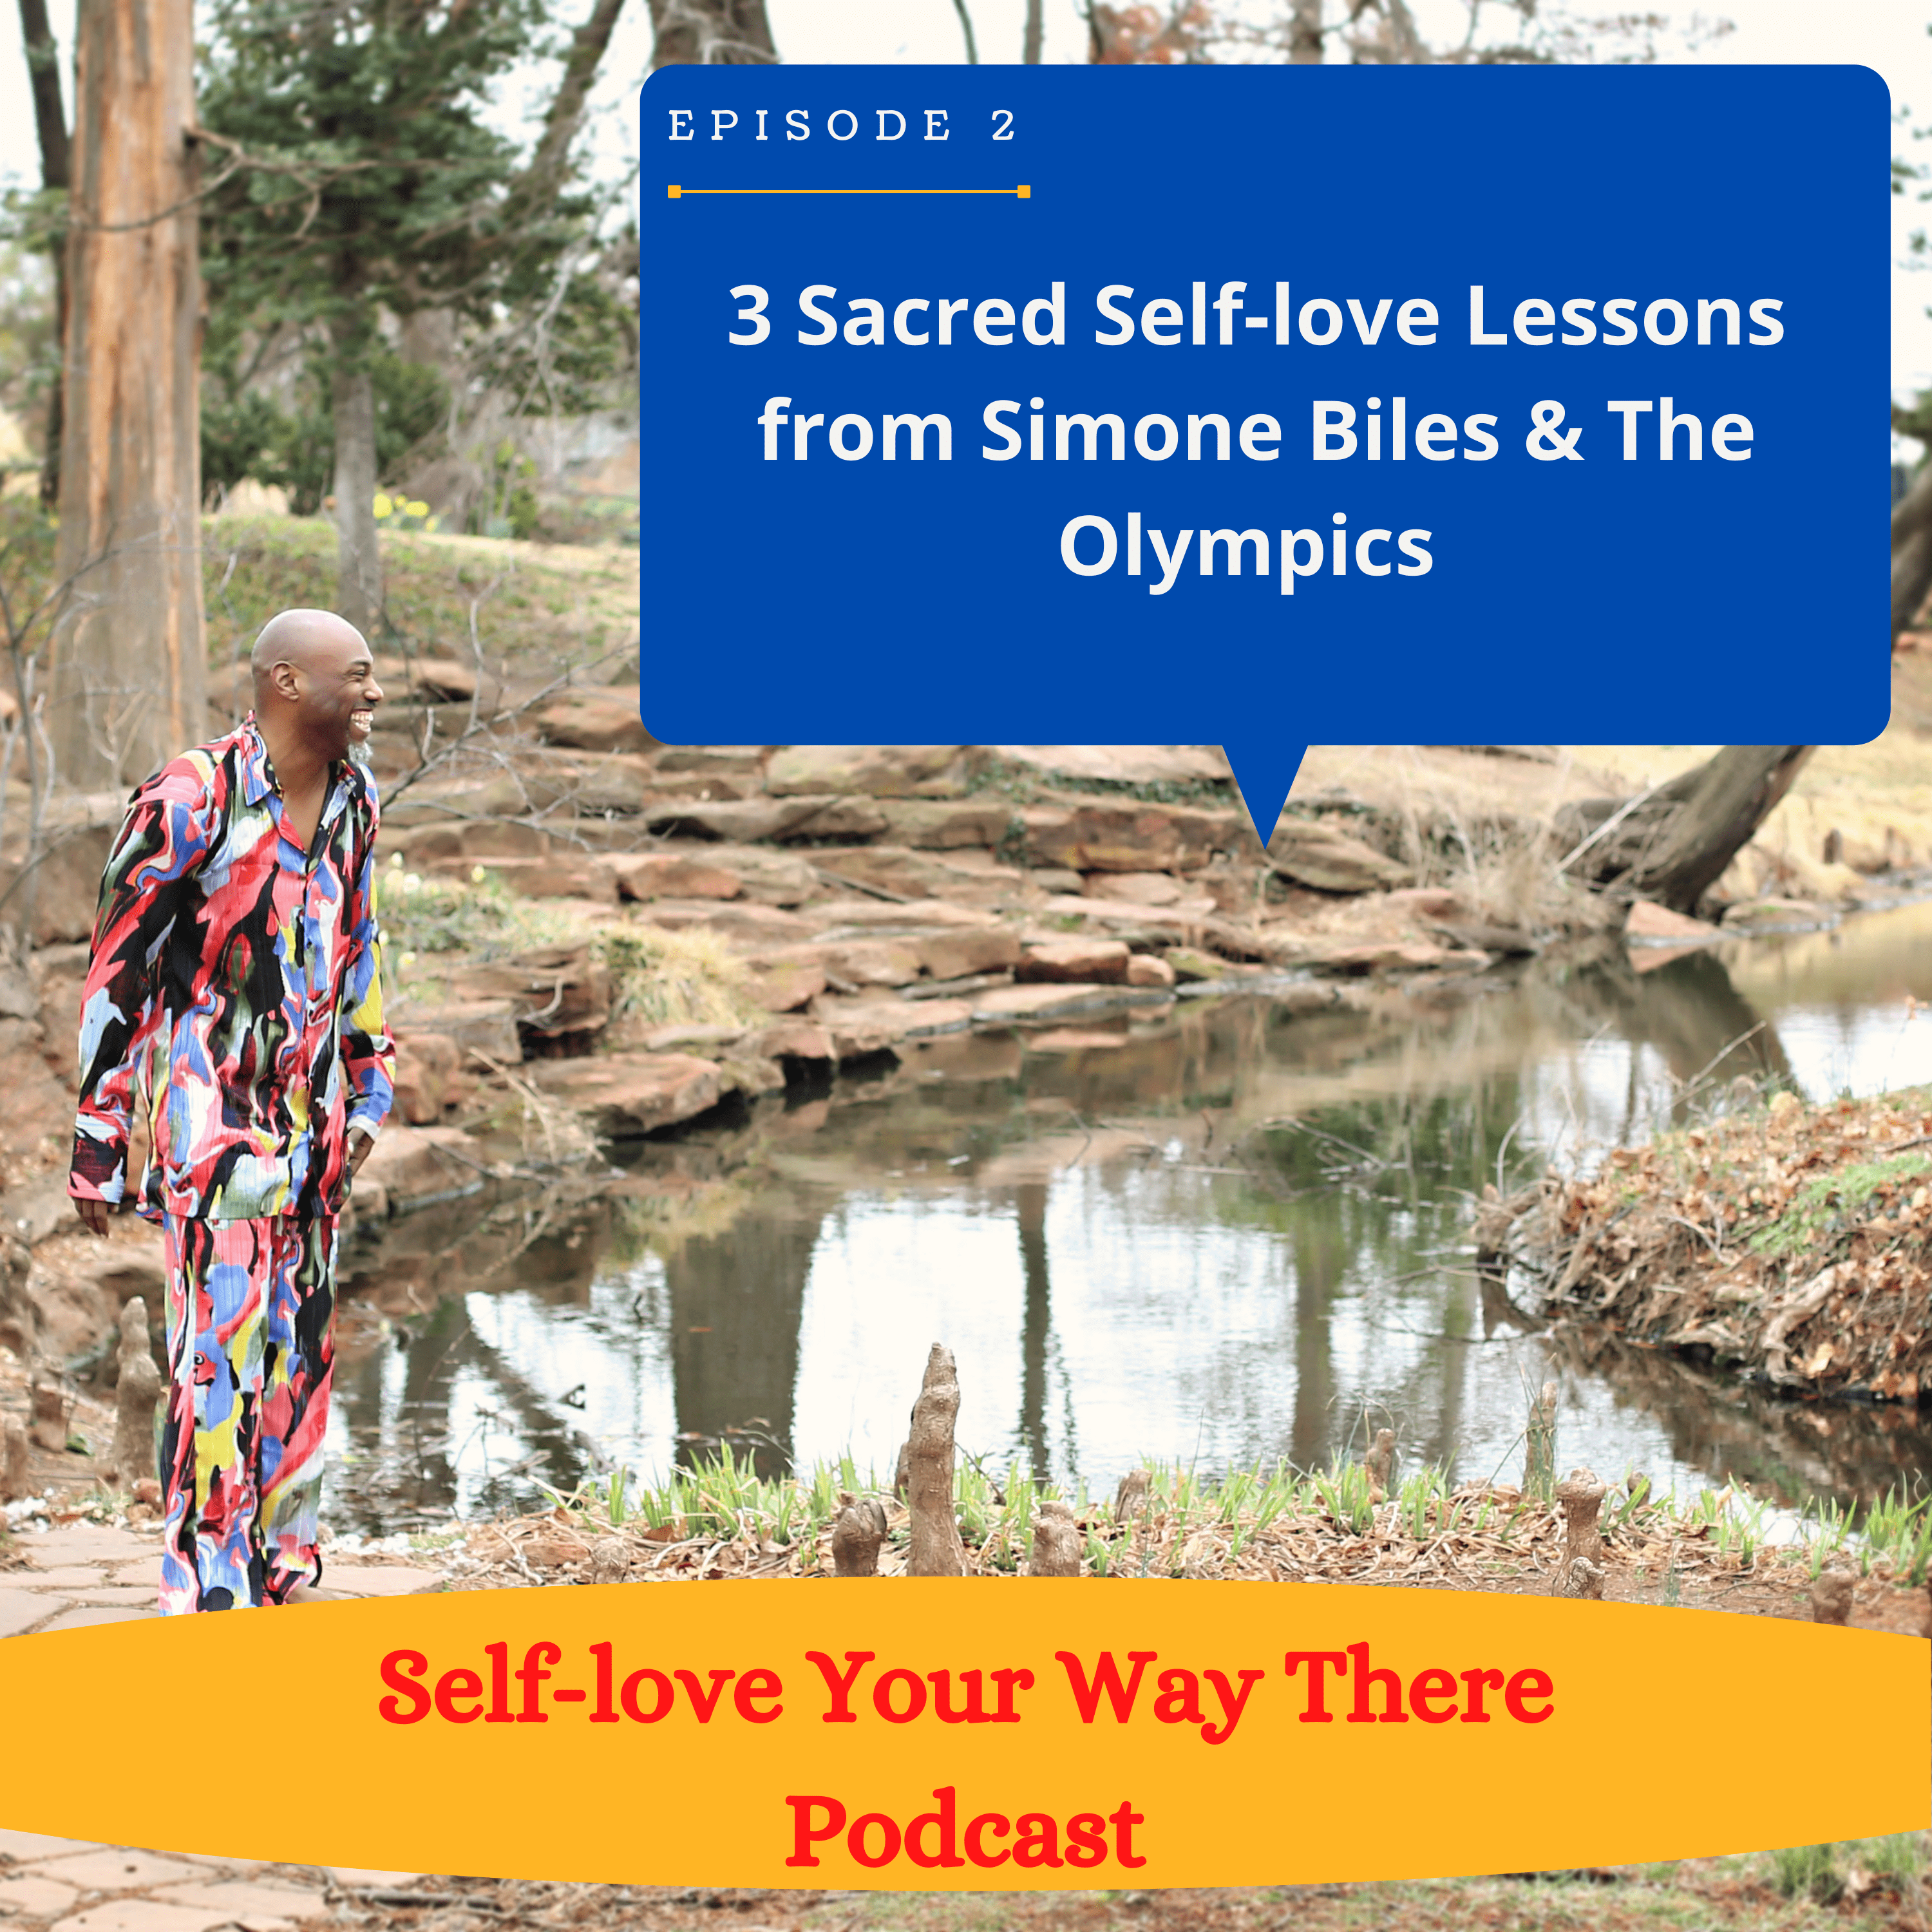 3 Sacred Self-love Lessons from Simone Biles & The Olympics